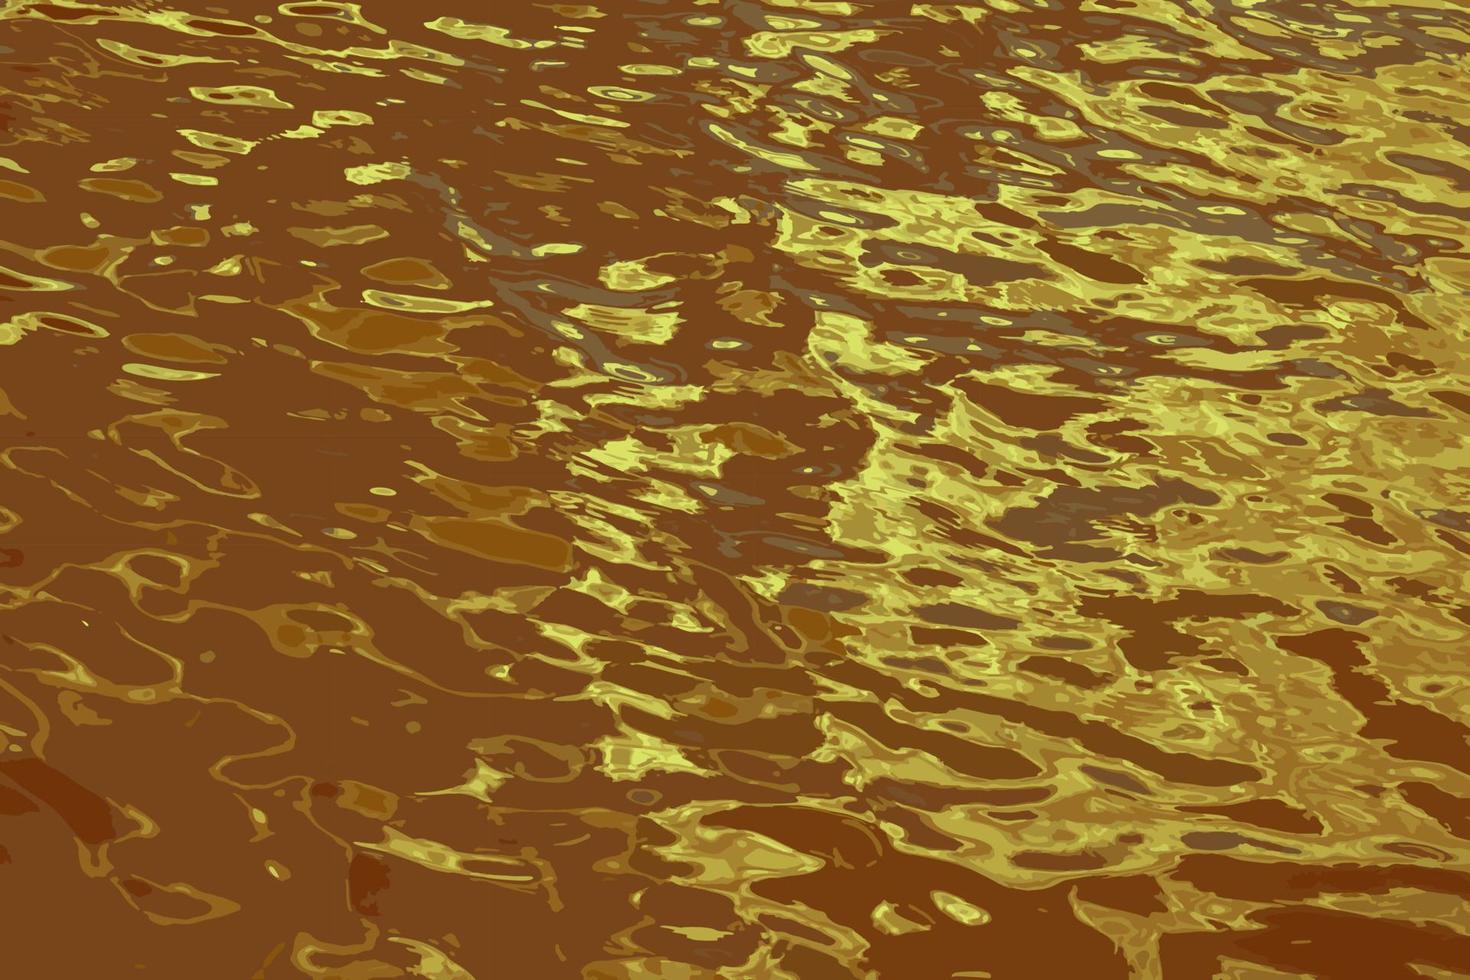 Vector illustration of water ripple texture background. Wavy water surface during sunset, golden light reflecting in the water.